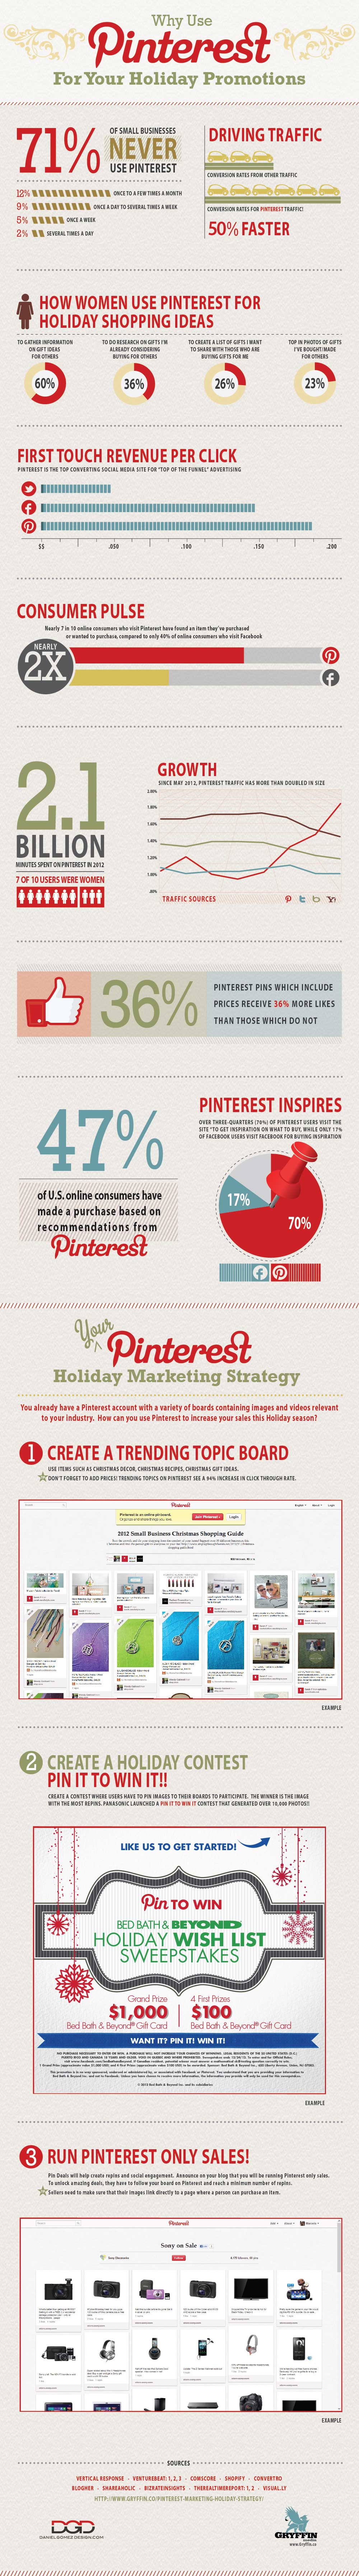 Pinterest Marketing Tips: Holiday Infographic